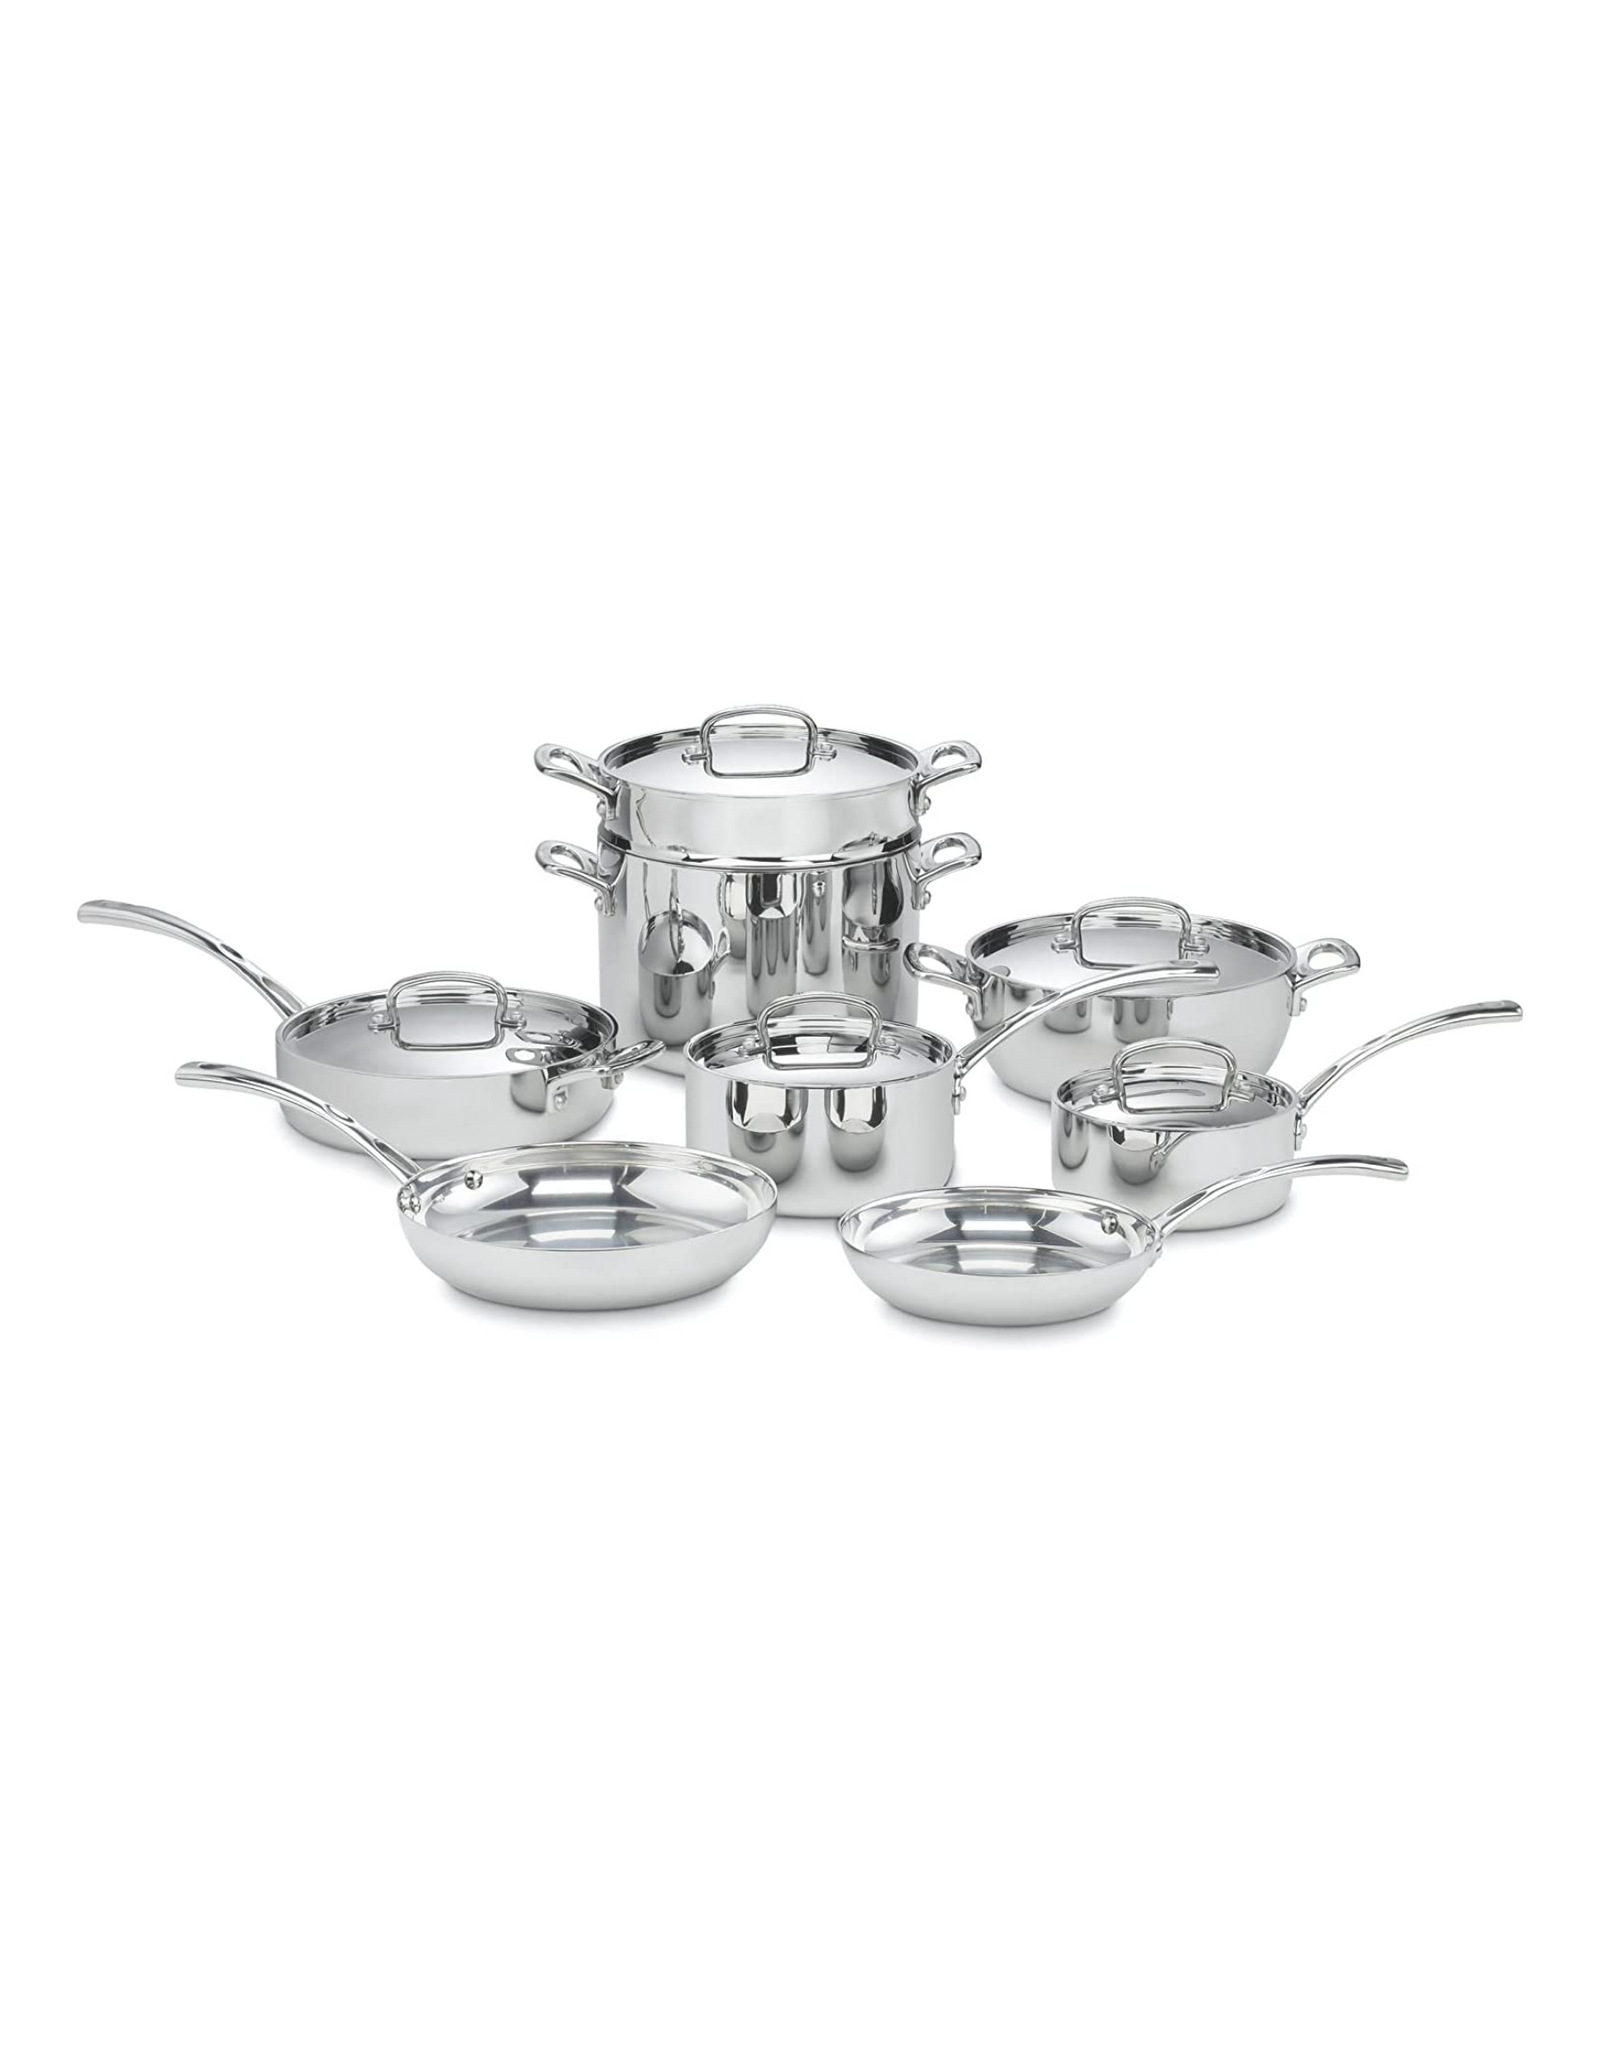 Cuisinart FCT-13 13-Piece Cookware Set French Classic Tri-Ply, Stainless Steel